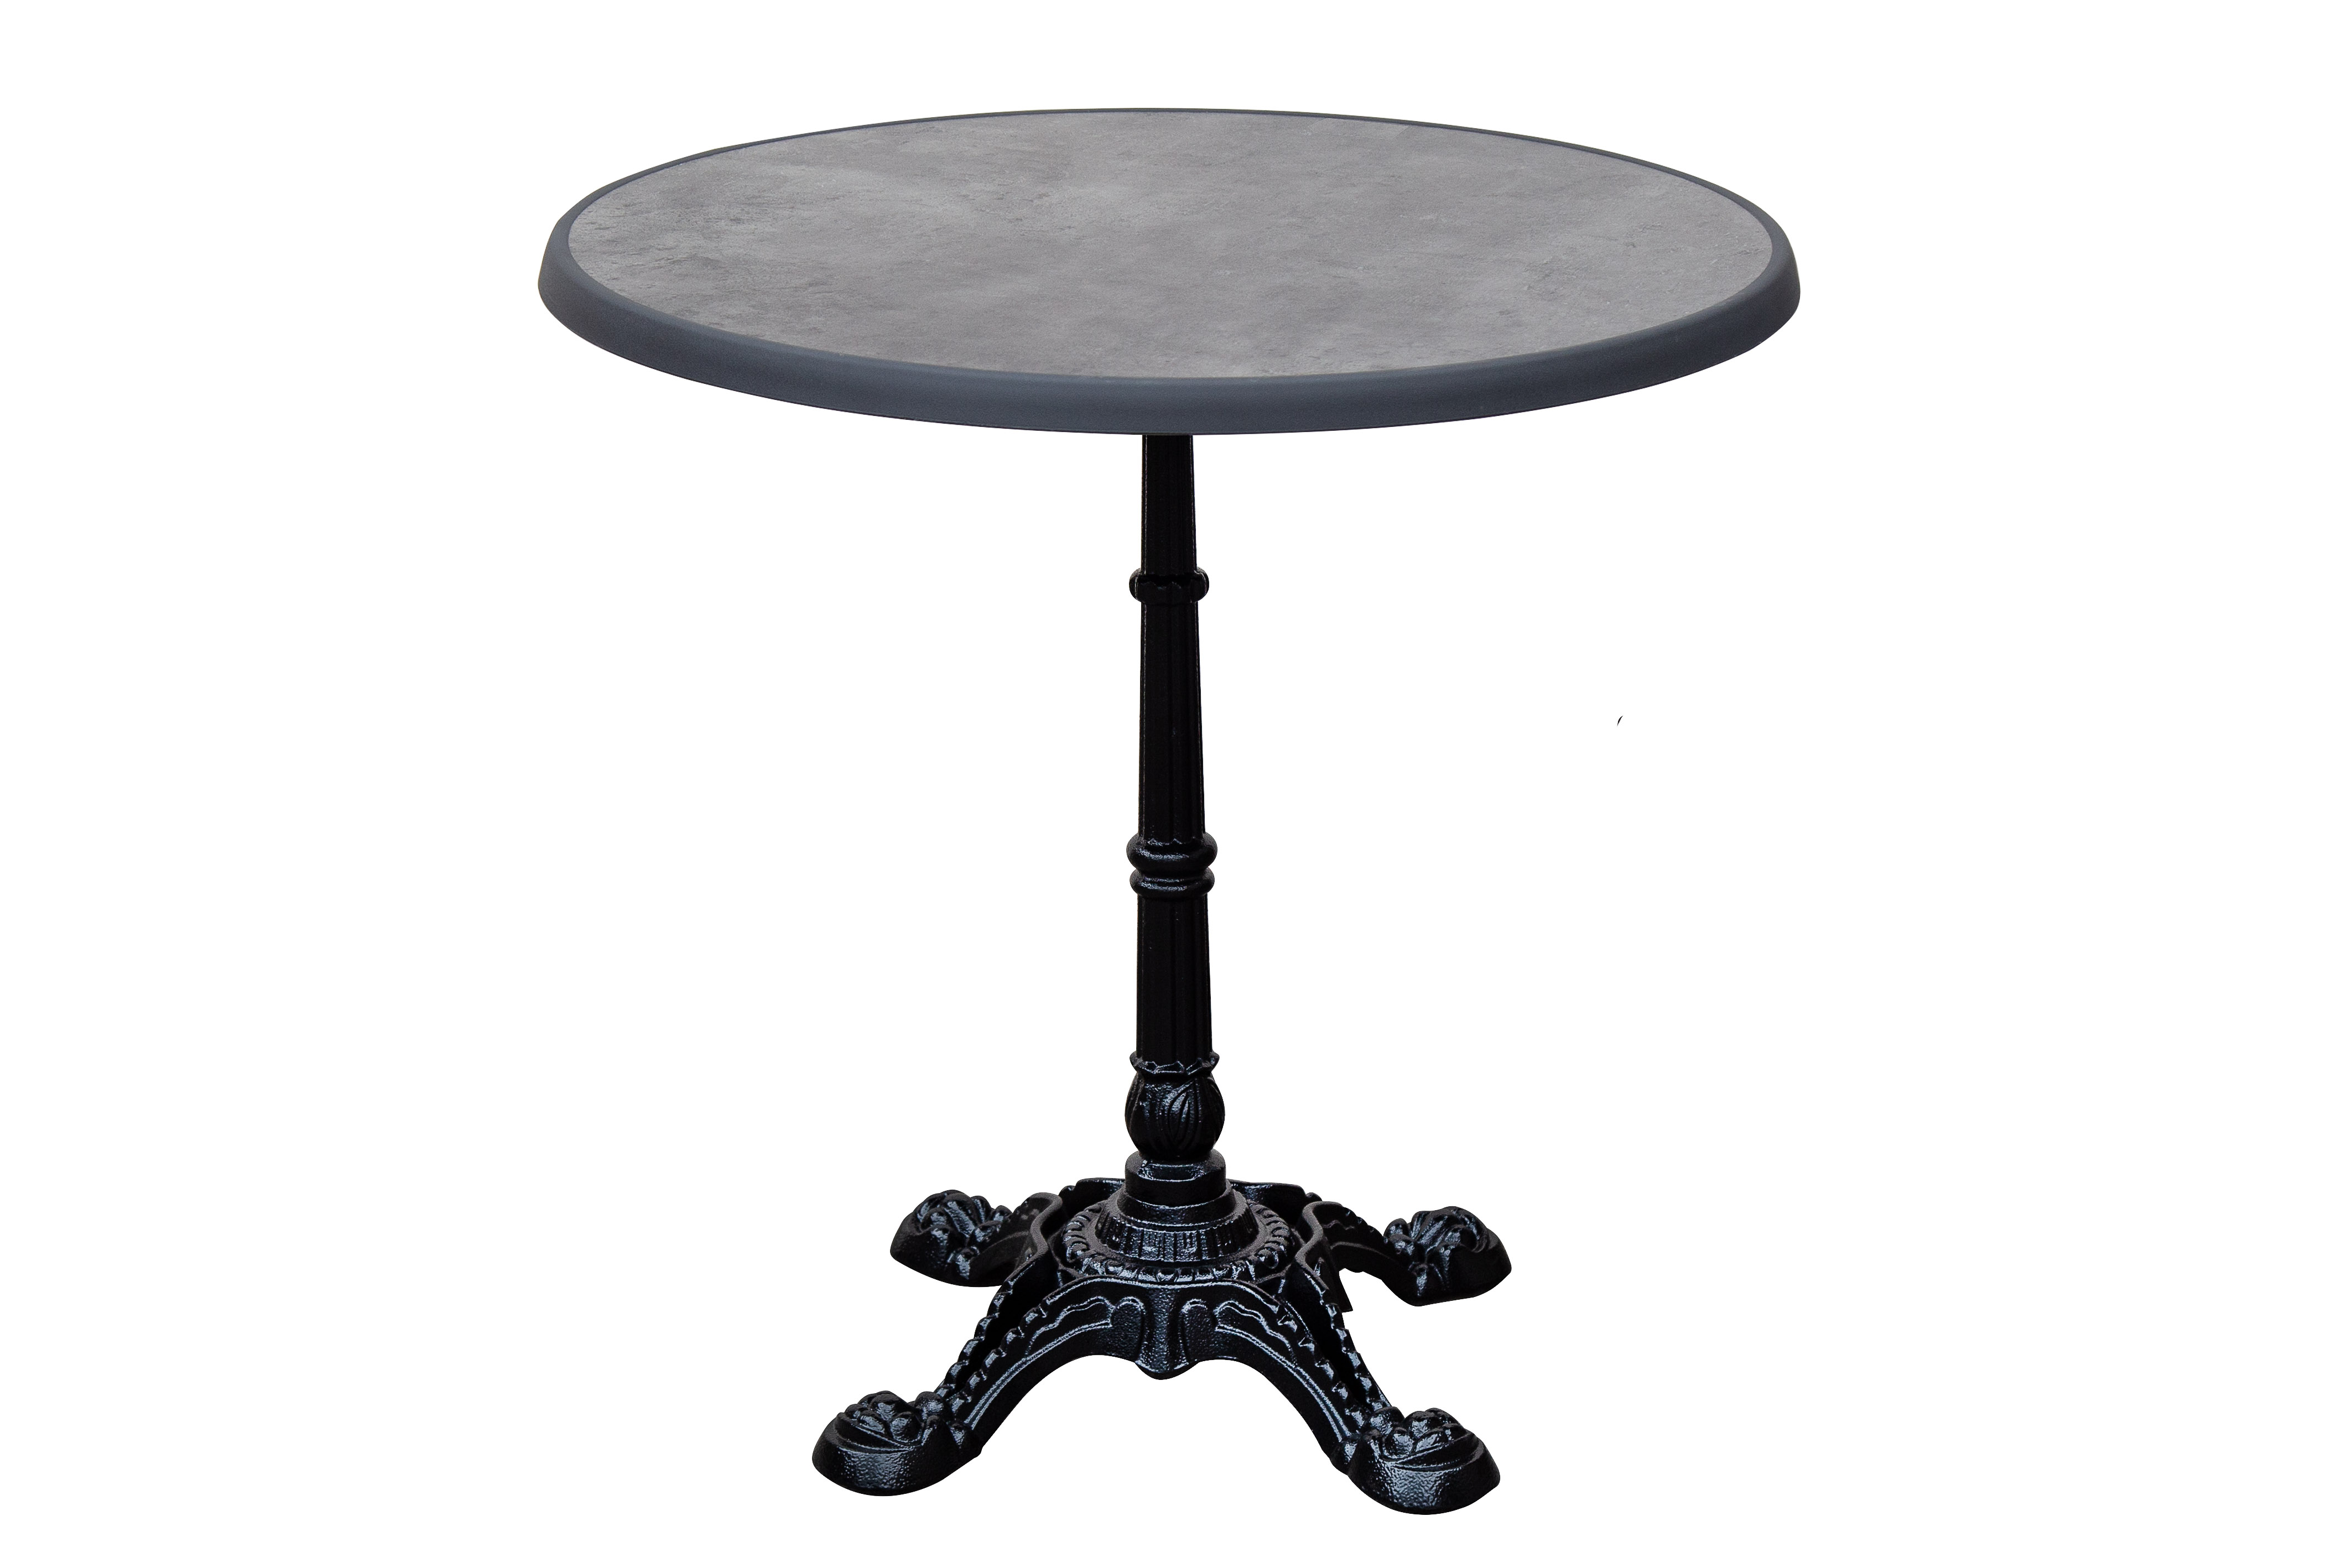 RESTAURANT TABLE & BASE GREY MARBLE SQUARE OR ROUND MODEL 6533